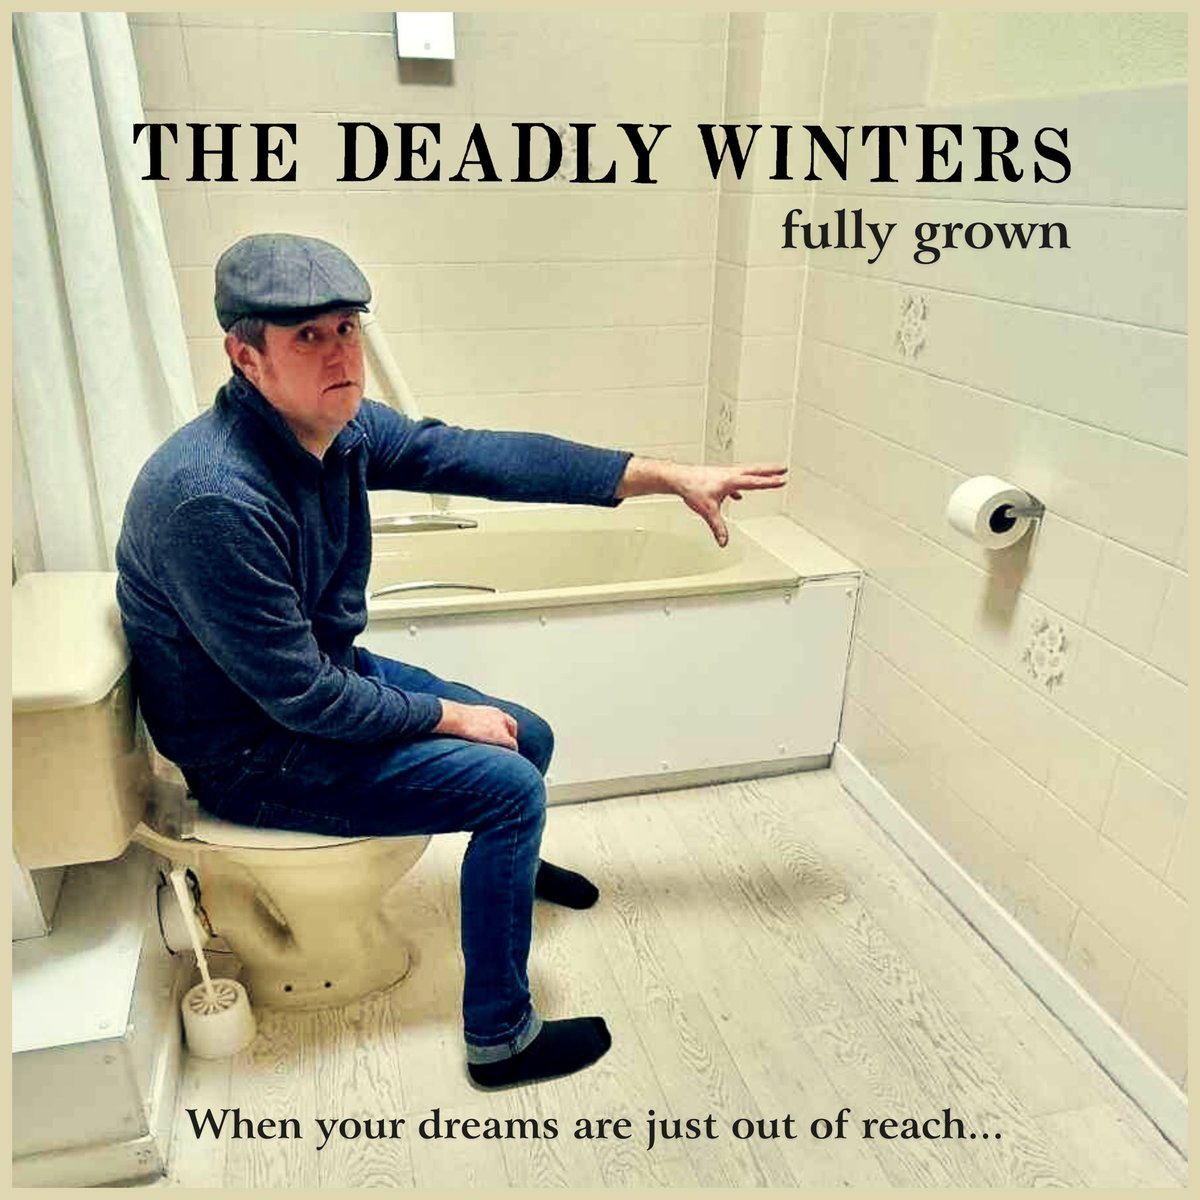 Fully Groan 🧻

From our new collection of songs, ‘Ever Onwards’.

When your dreams are *just* out of reach...

🎶 open.spotify.com/track/5vOqO6Ob…

#hopesanddreams #thedeadlywinters #fullygrown #songwriter #everonwards #altfolk #scottishmusic #musicfromscotland #newmusic